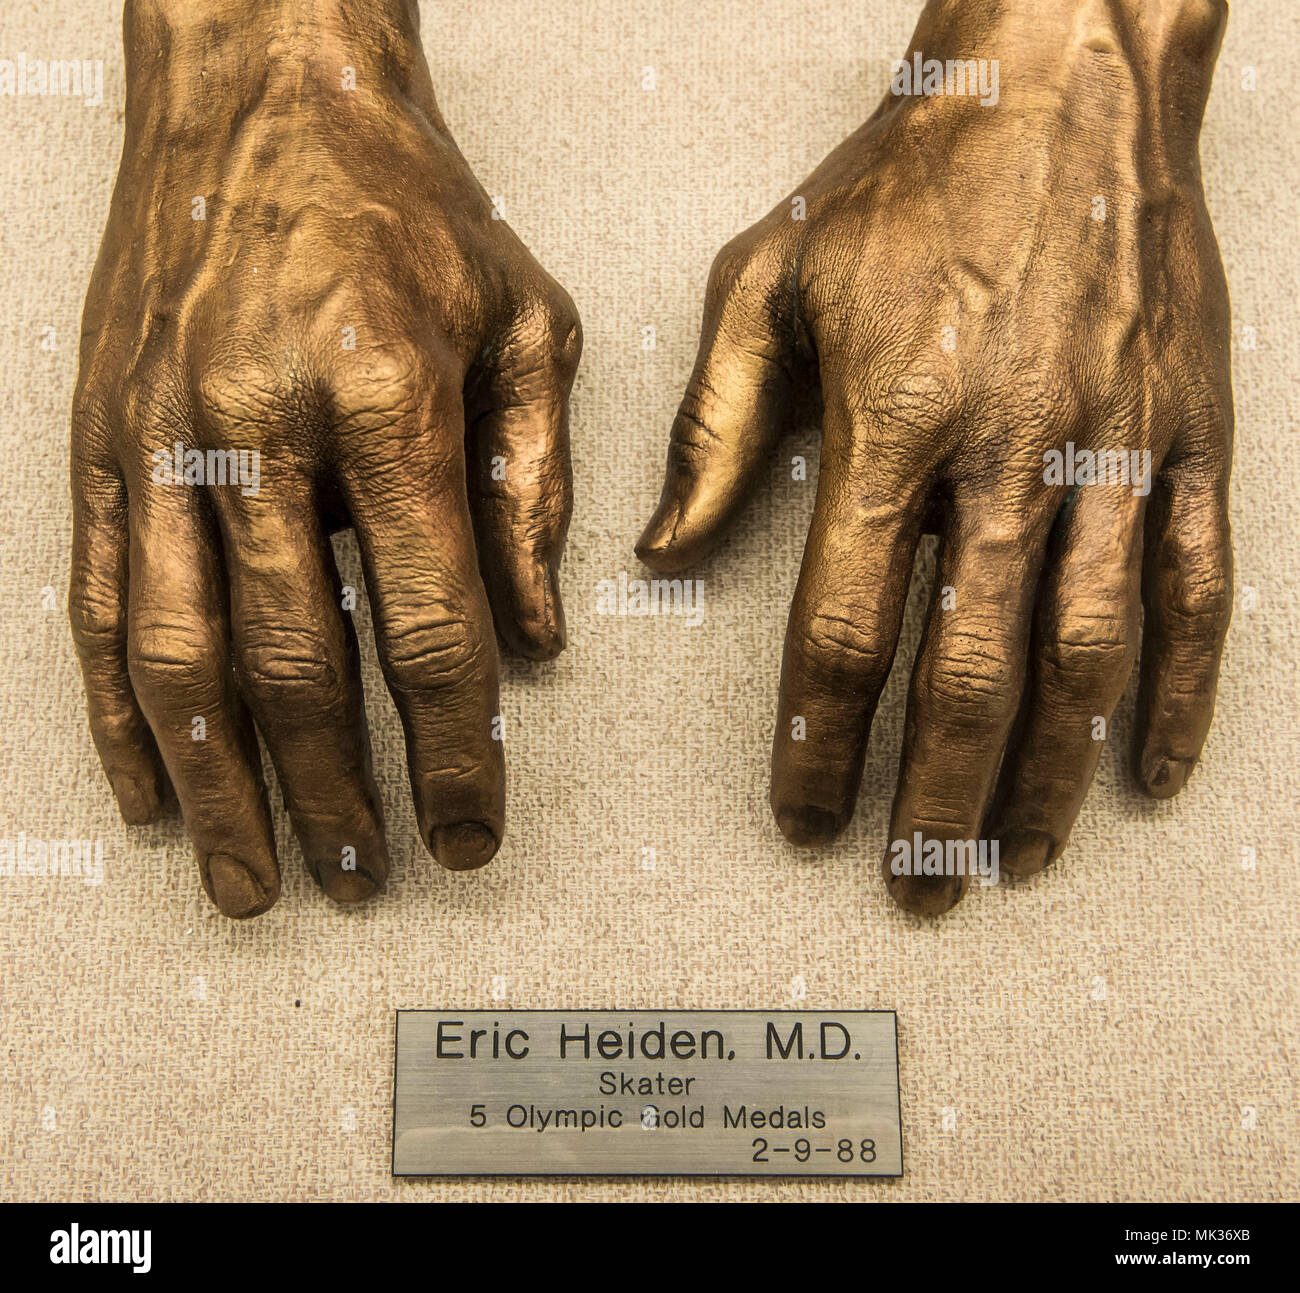 Dallas, Texas, USA. 06th May, 2018. The bronzed hands of ice skating great ERIC HEIDEN on display at the George W. Truett Memorial Hospital at the Baylor University Medical Center. The more than 100 bronze cast hands of well known persons from the fields of politics, sports, the arts and exploration were the work of orthopedic surgeon Adrian E. Flatt (1921-2017), whose specialty was hand surgery. Credit: Brian Cahn/ZUMA Wire/Alamy Live News Stock Photo